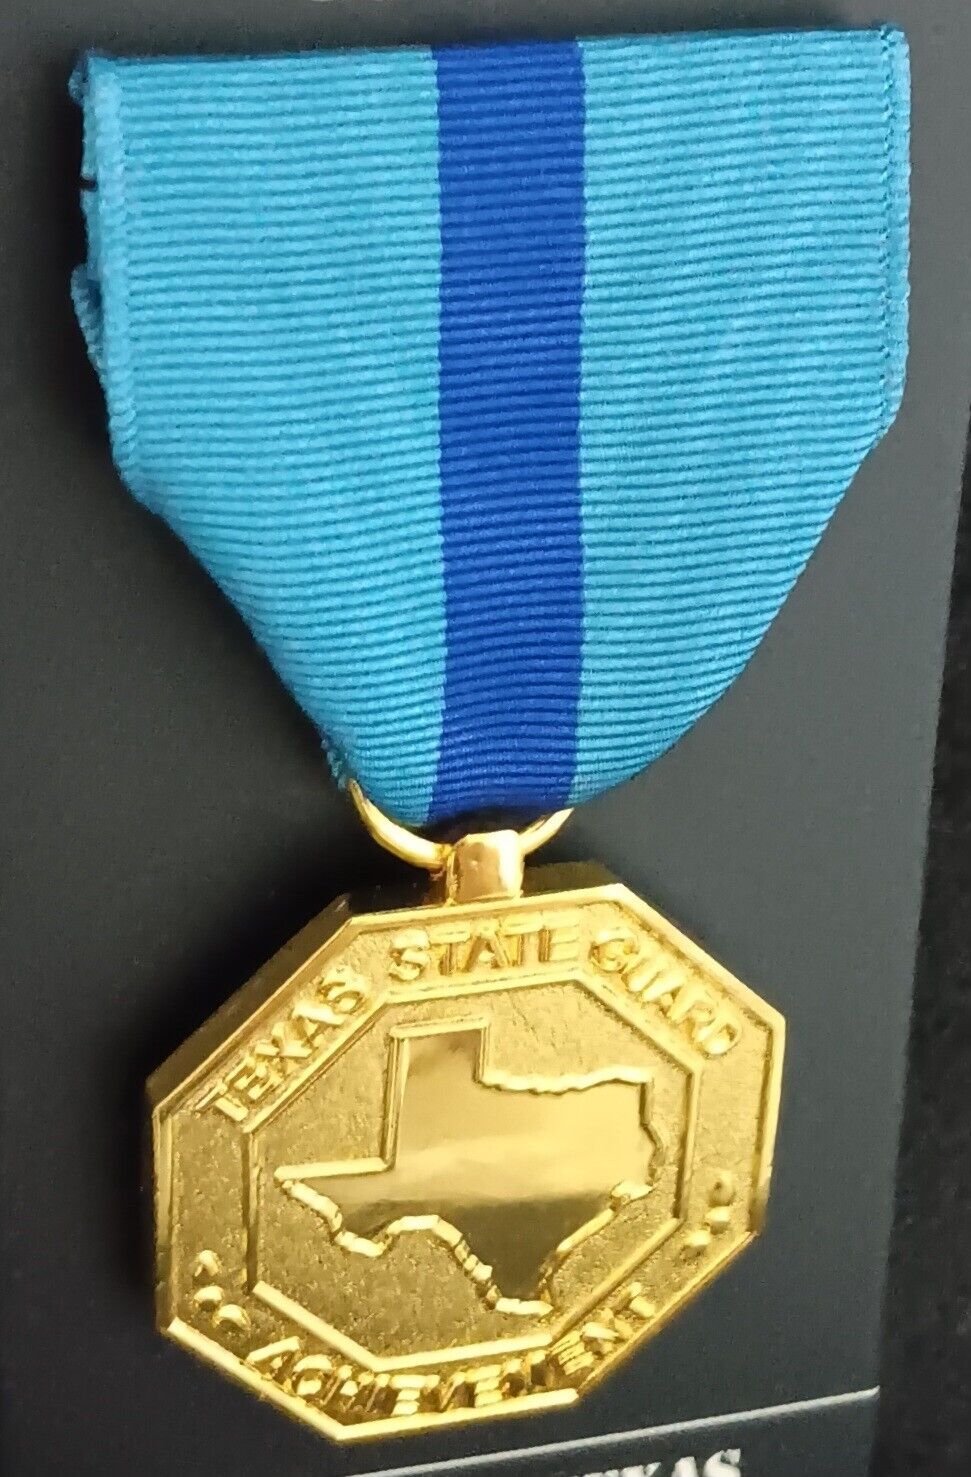 GOLD Texas State Guard Achievement Medal with Silk Moiré Ribbon